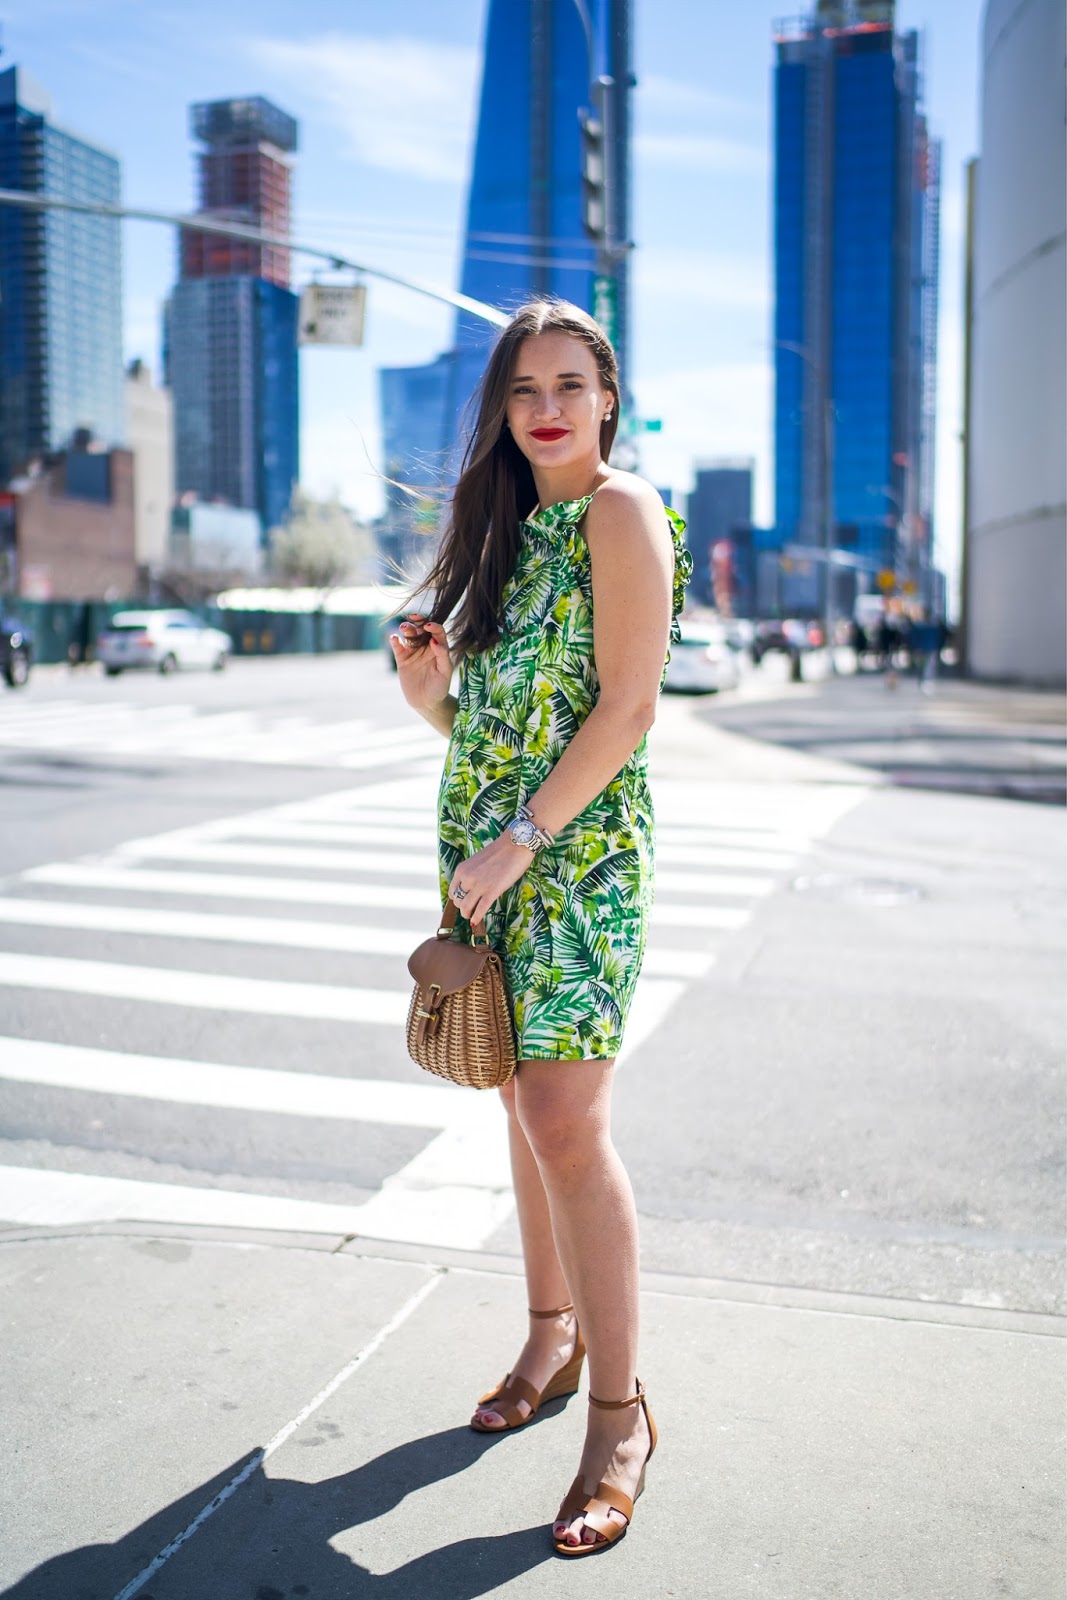 Banana Leaf Dress Under $100 styled by popular New York fashion blogger, Covering the Bases